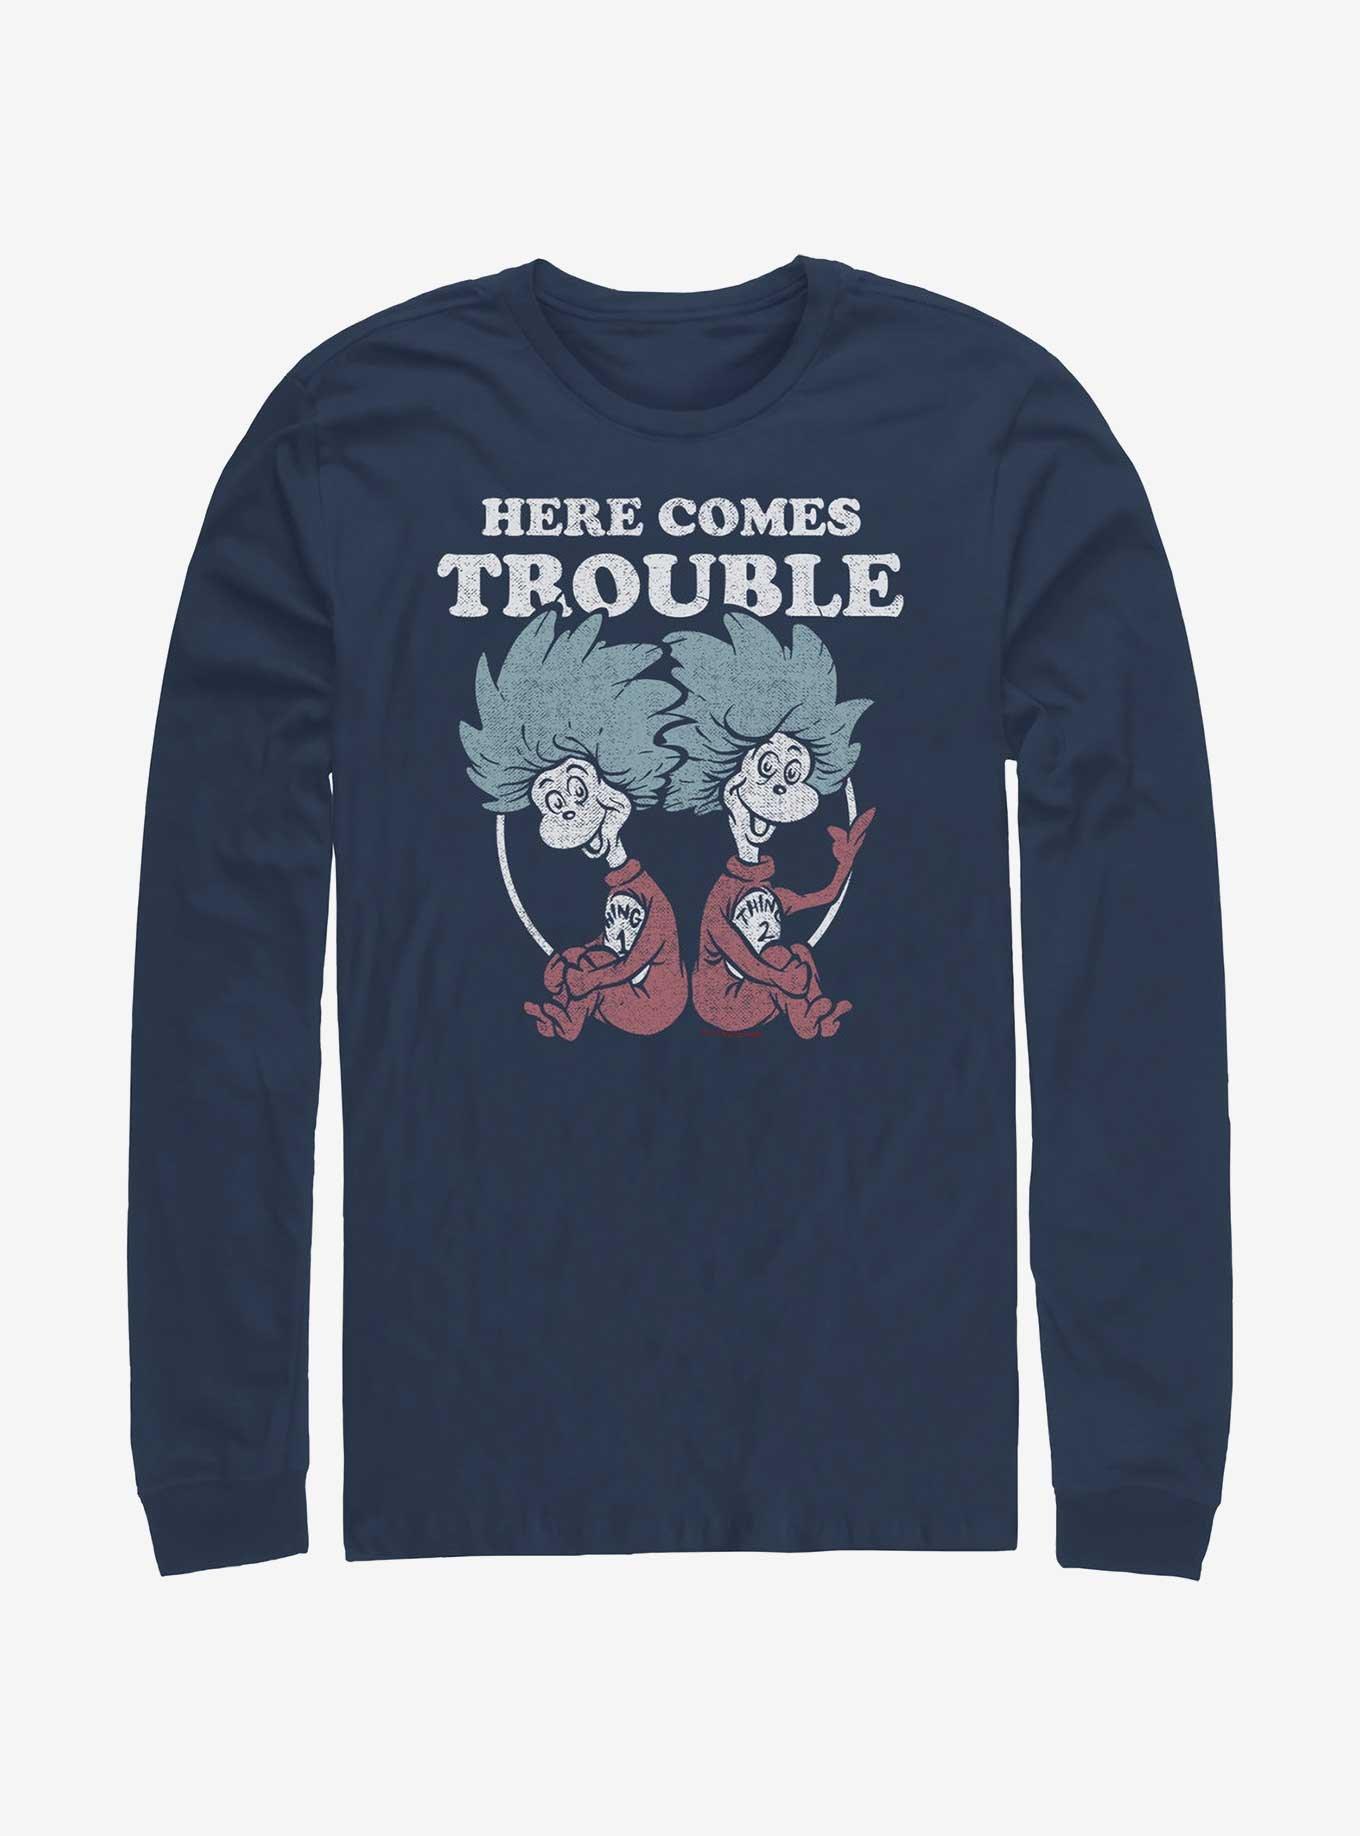 Dr. Seuss Thing 1 and Thing 2 Trouble Long-Sleeve T-Shirt, NAVY, hi-res